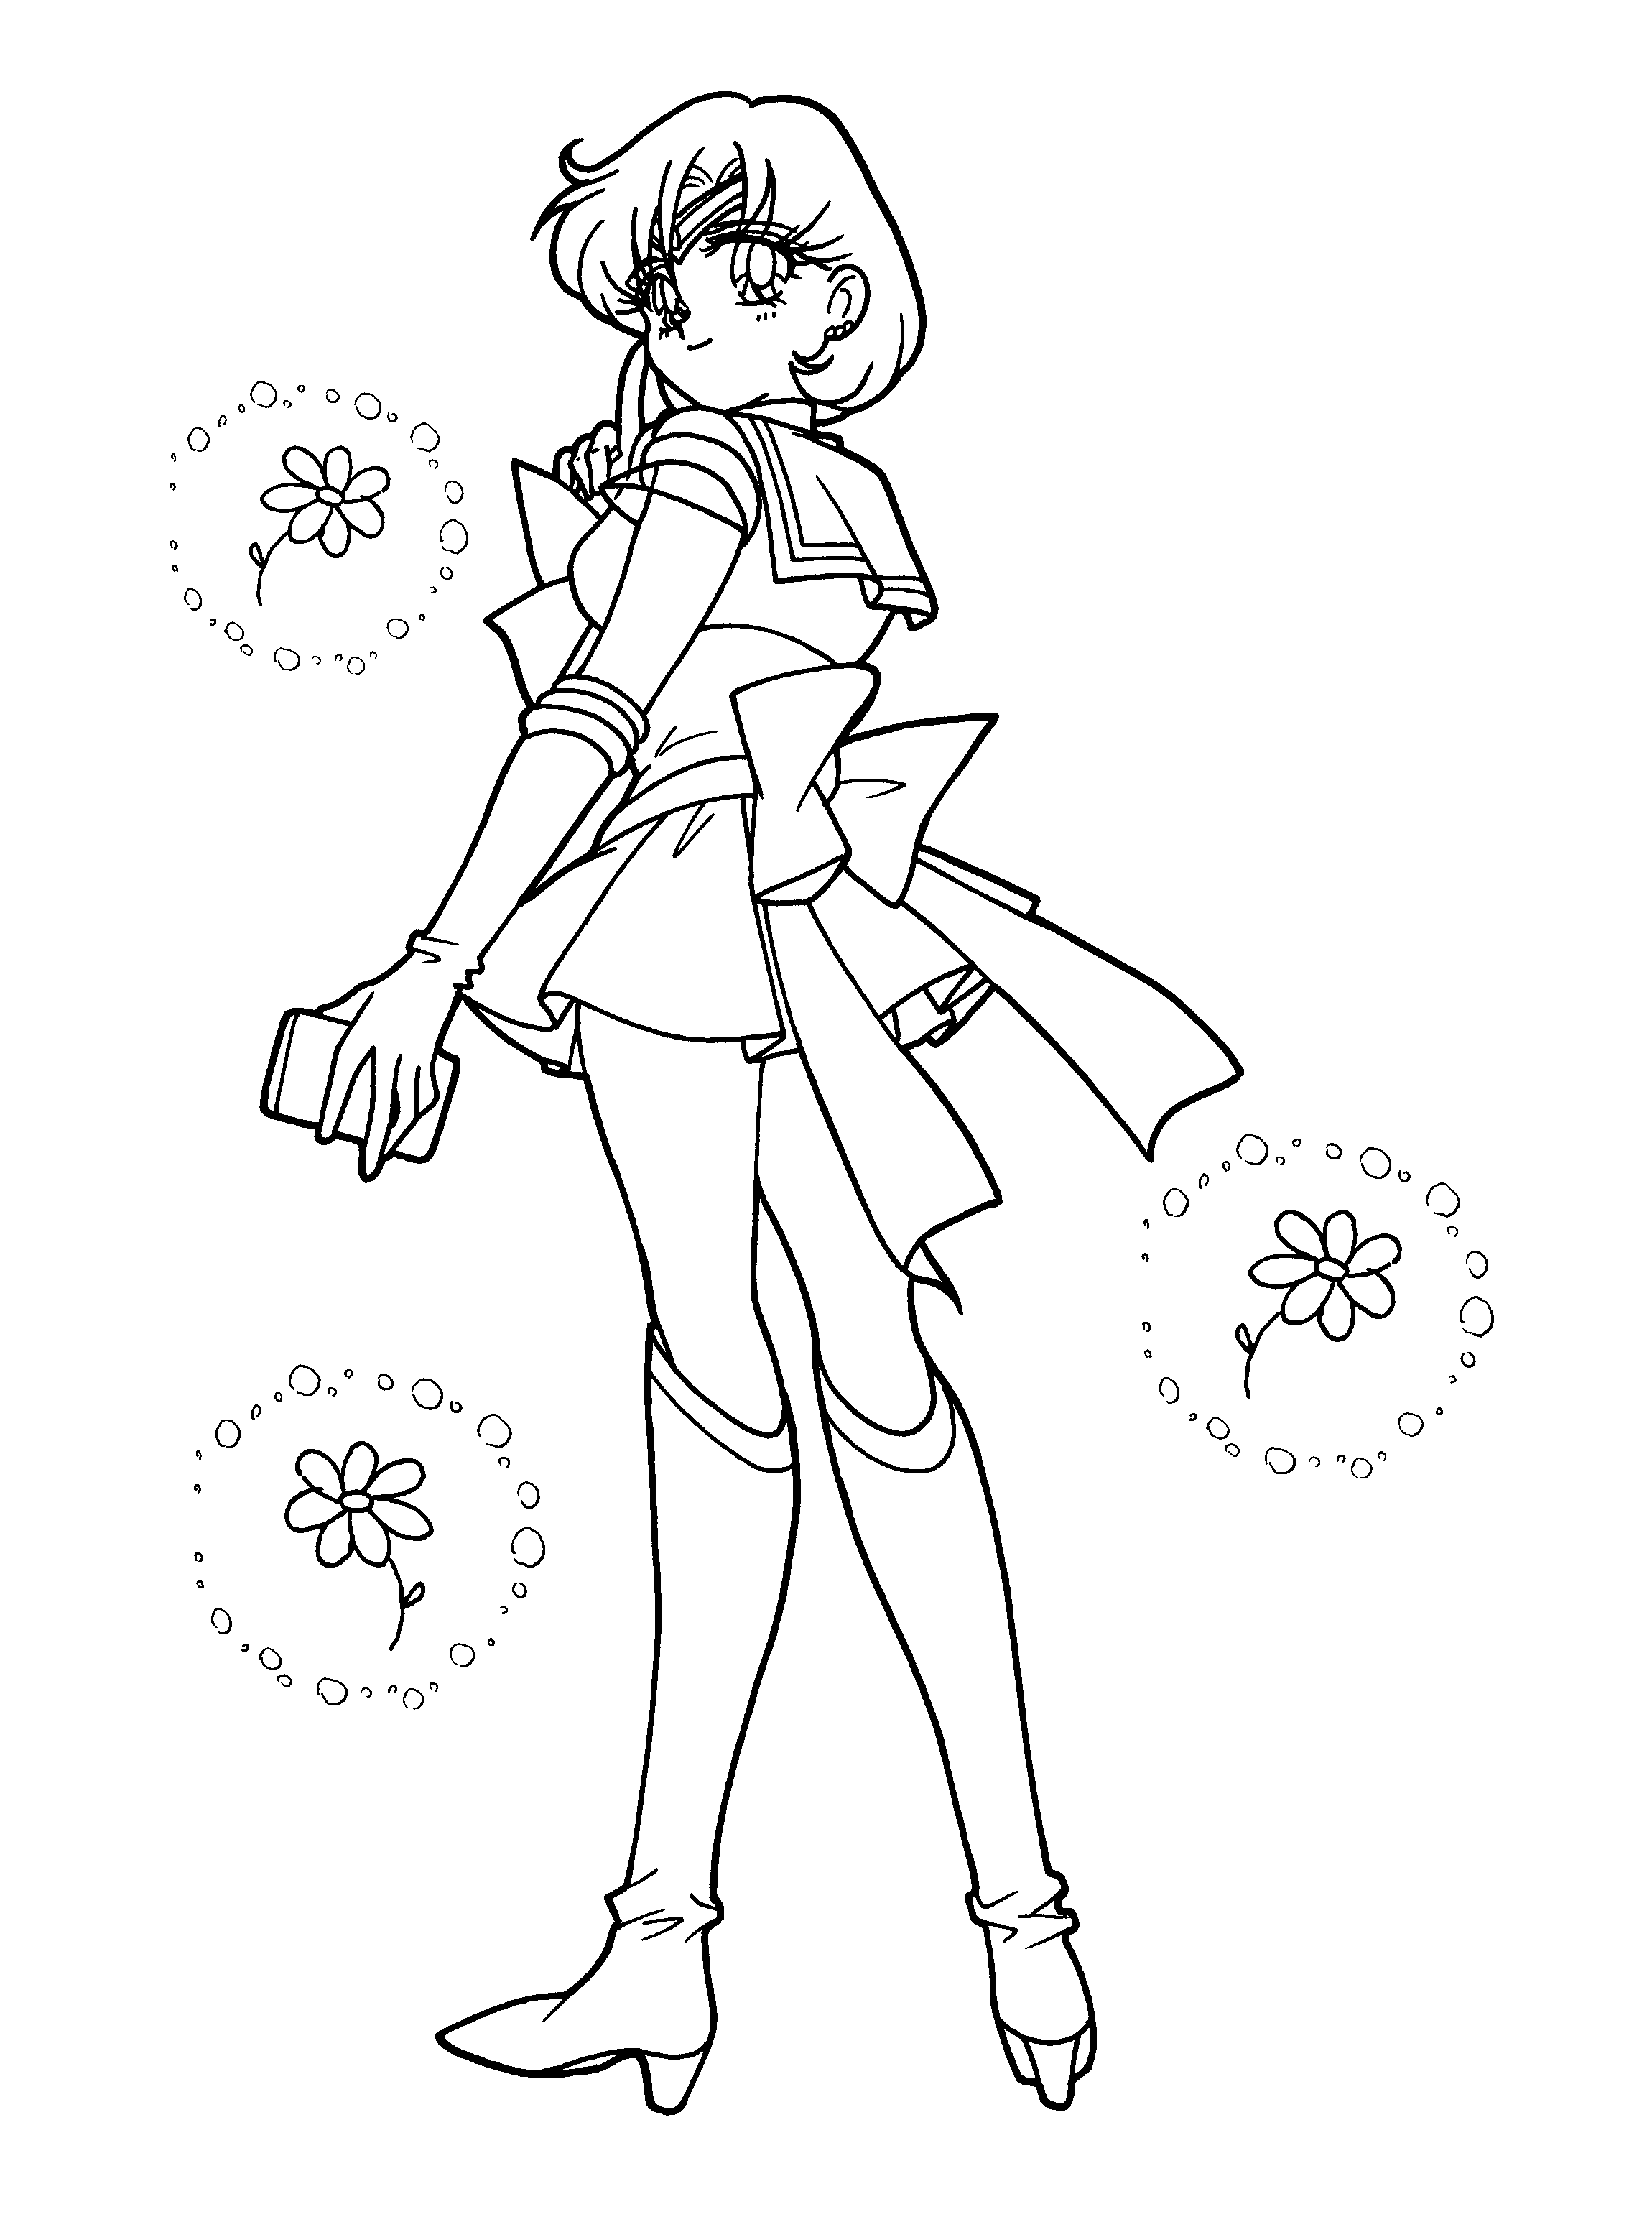 animated-coloring-pages-sailor-moon-image-0131